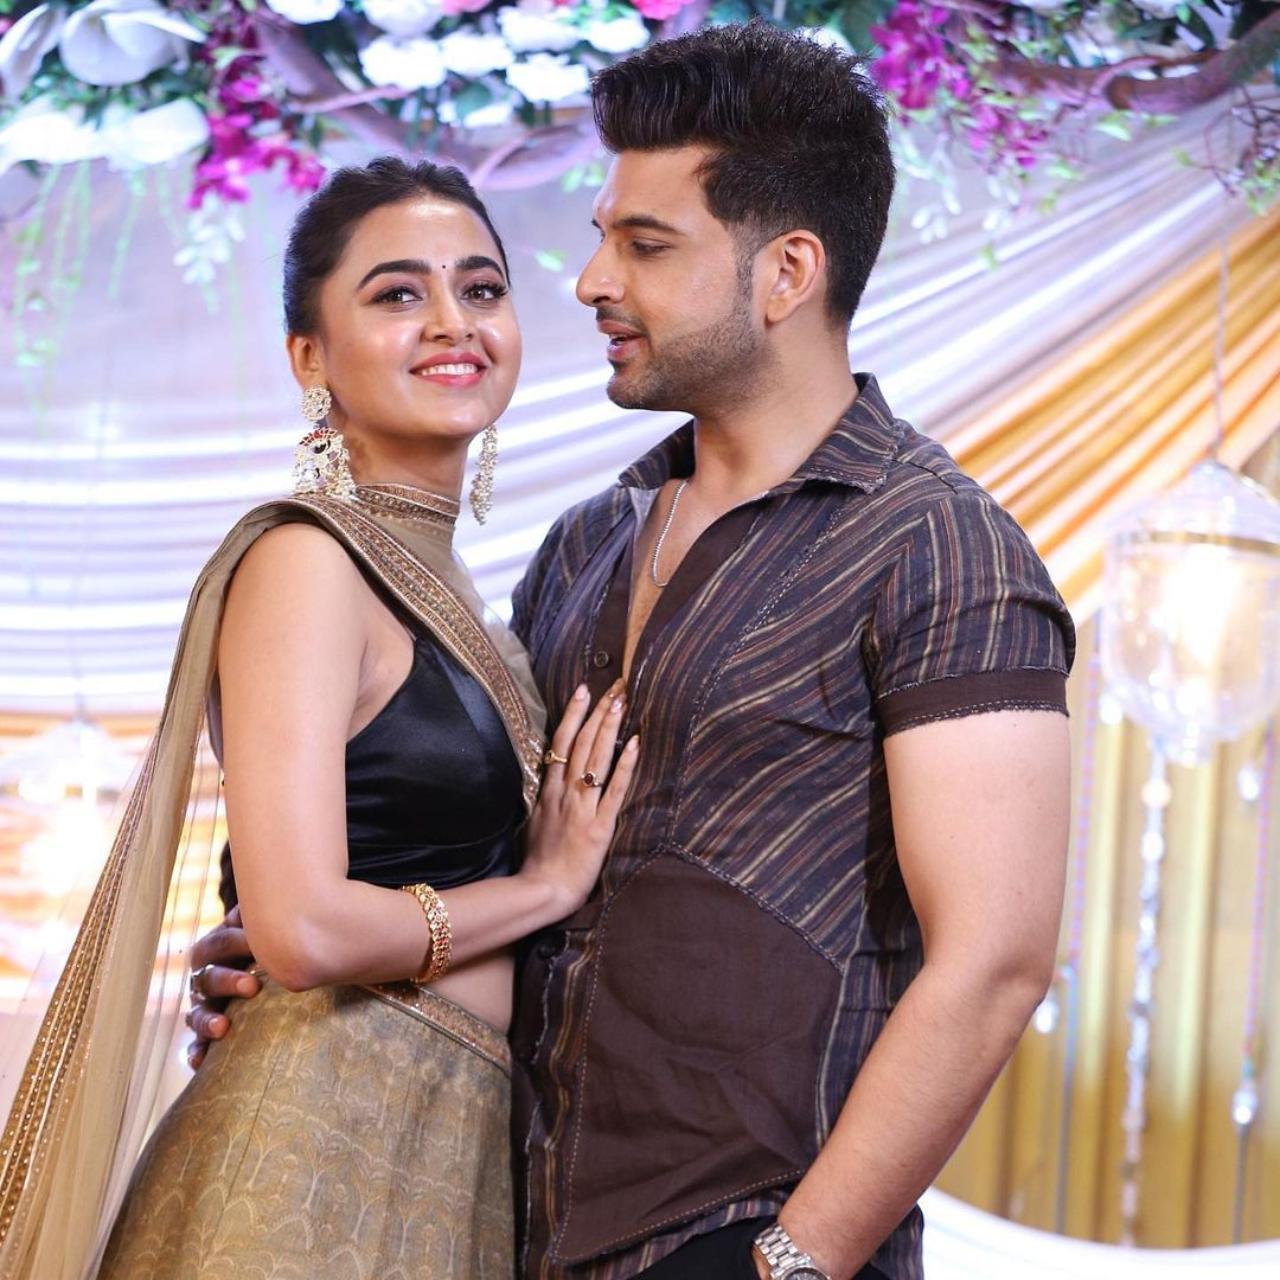 Karan and Tejasswi's relationship started after the former confessed on Bigg Boss 15 that he has a crush on the latter. With a  little help from singer and co-contestanst Akasa, they started dating